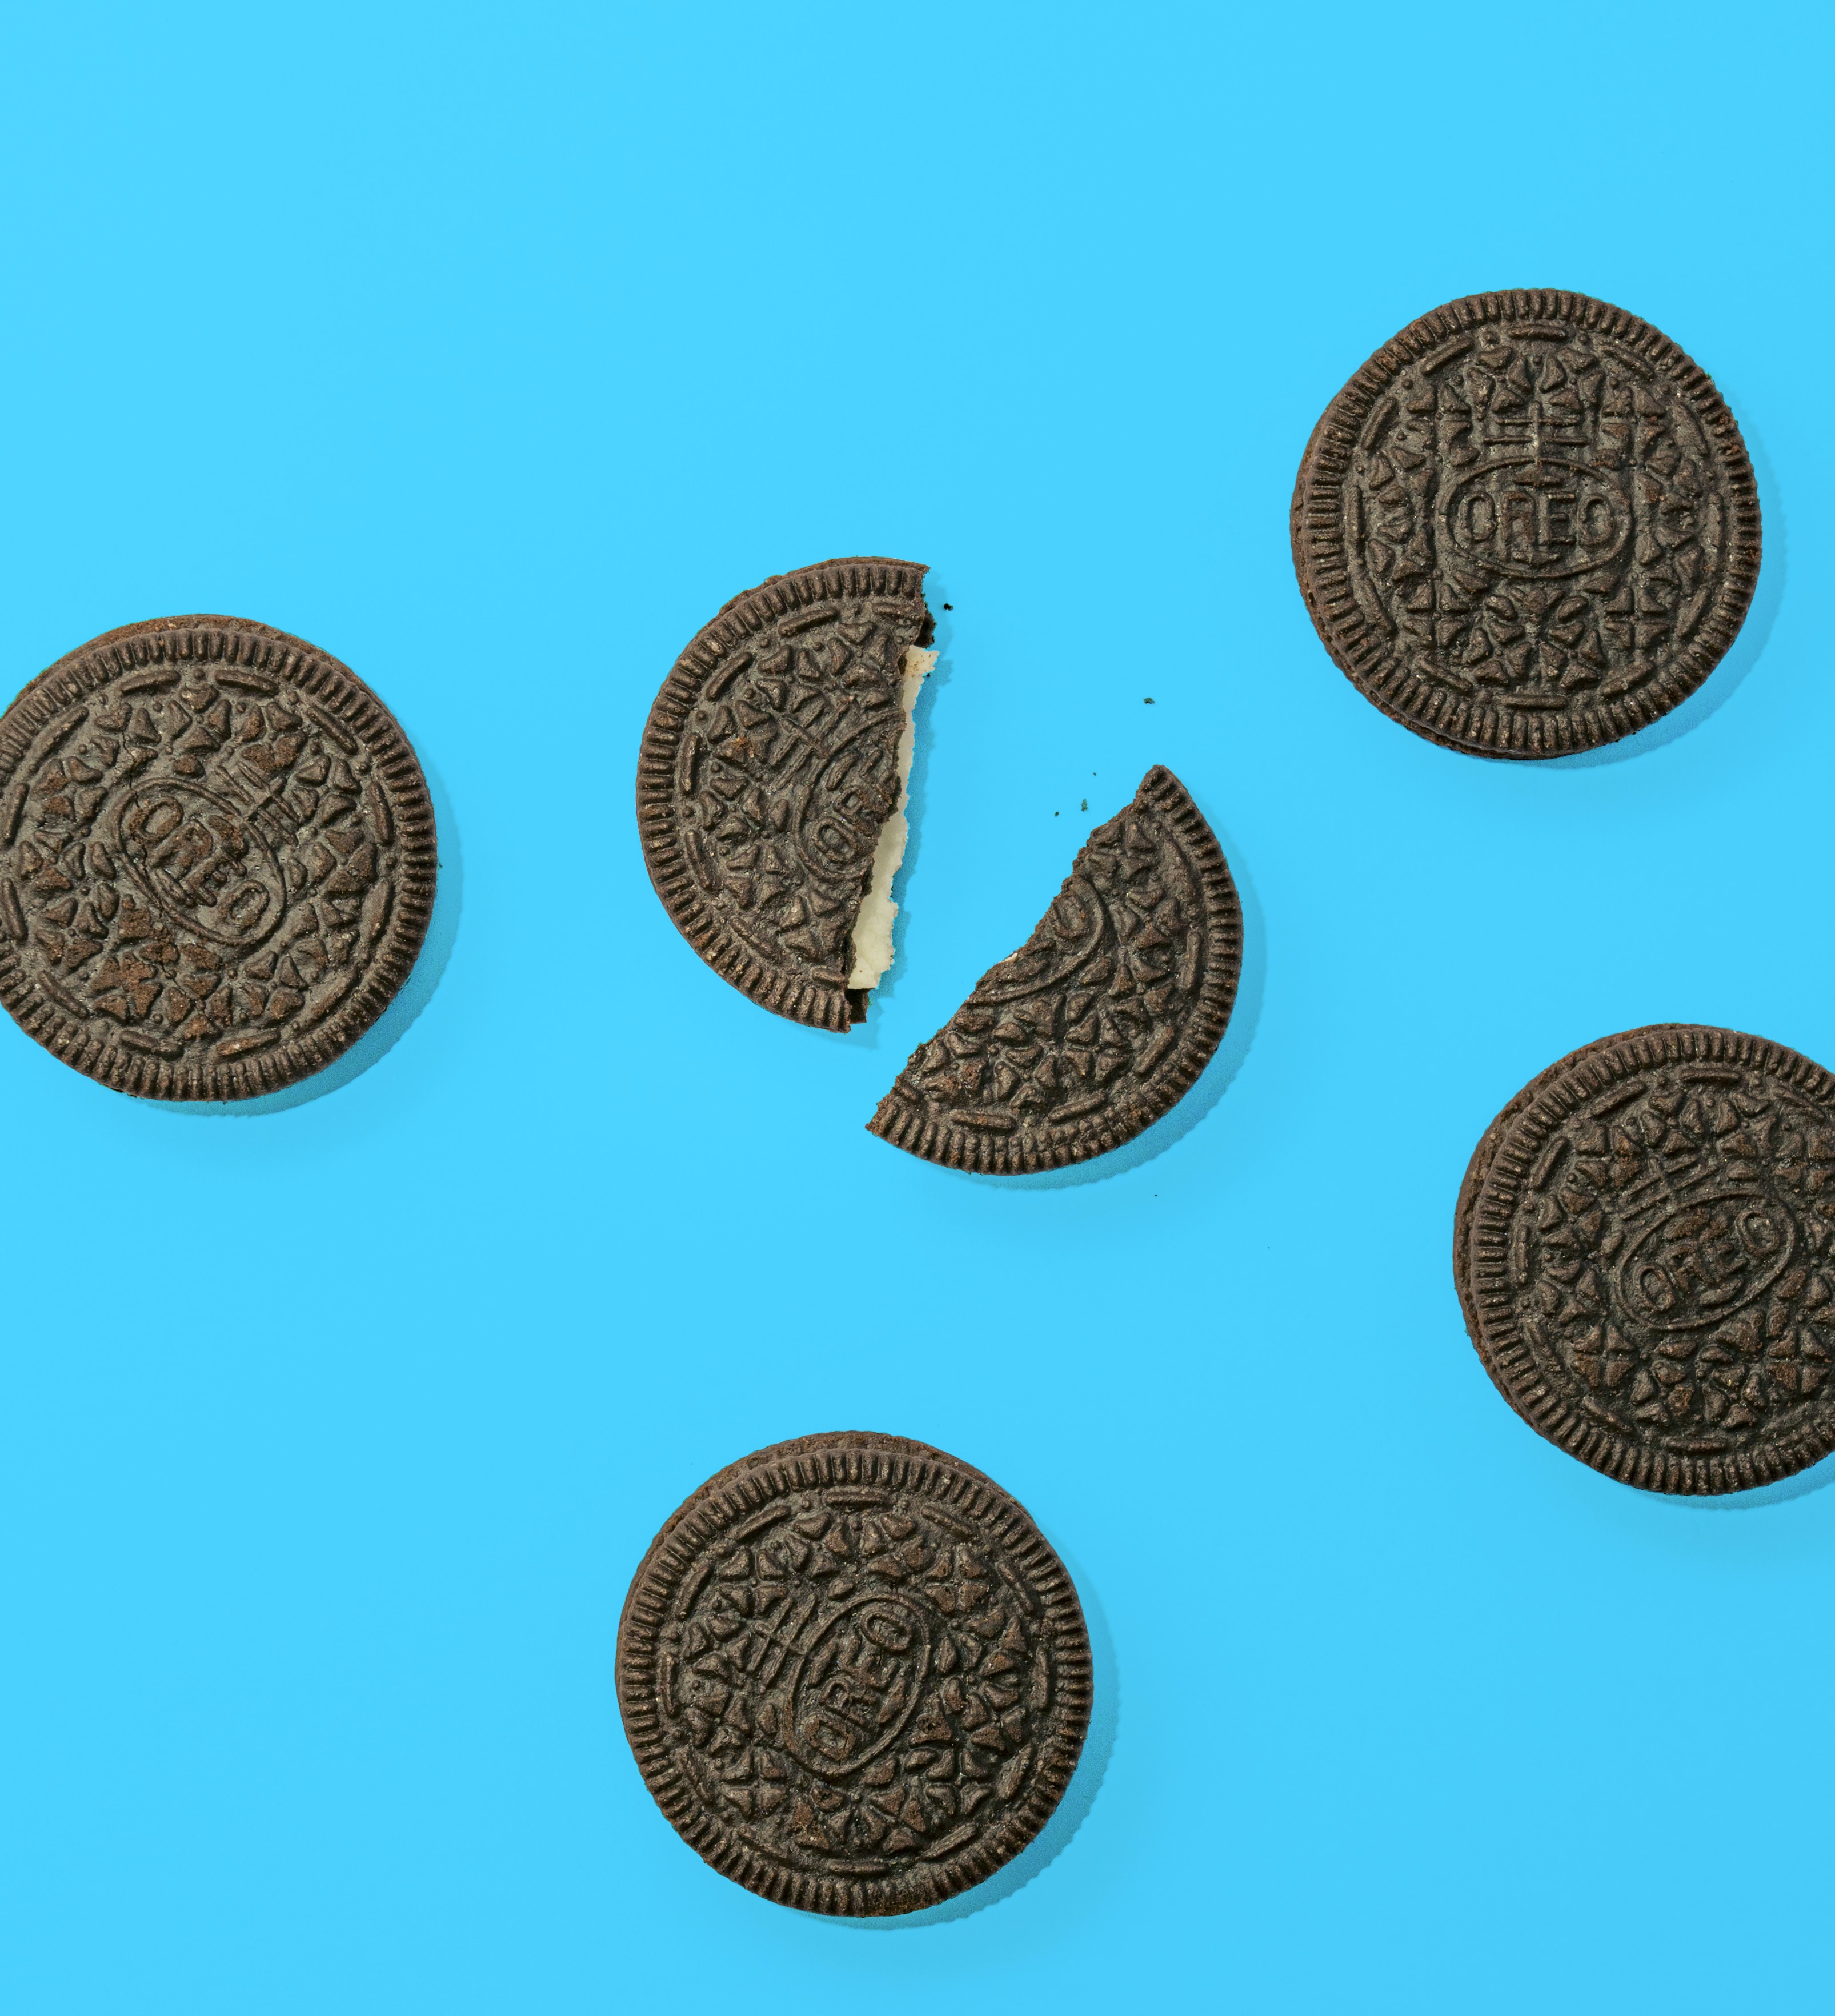 Do You Know Why Oreo Biscuit Cream Sticks To One Wafer When Twisted Apart?  'Oreometer' Can Answer